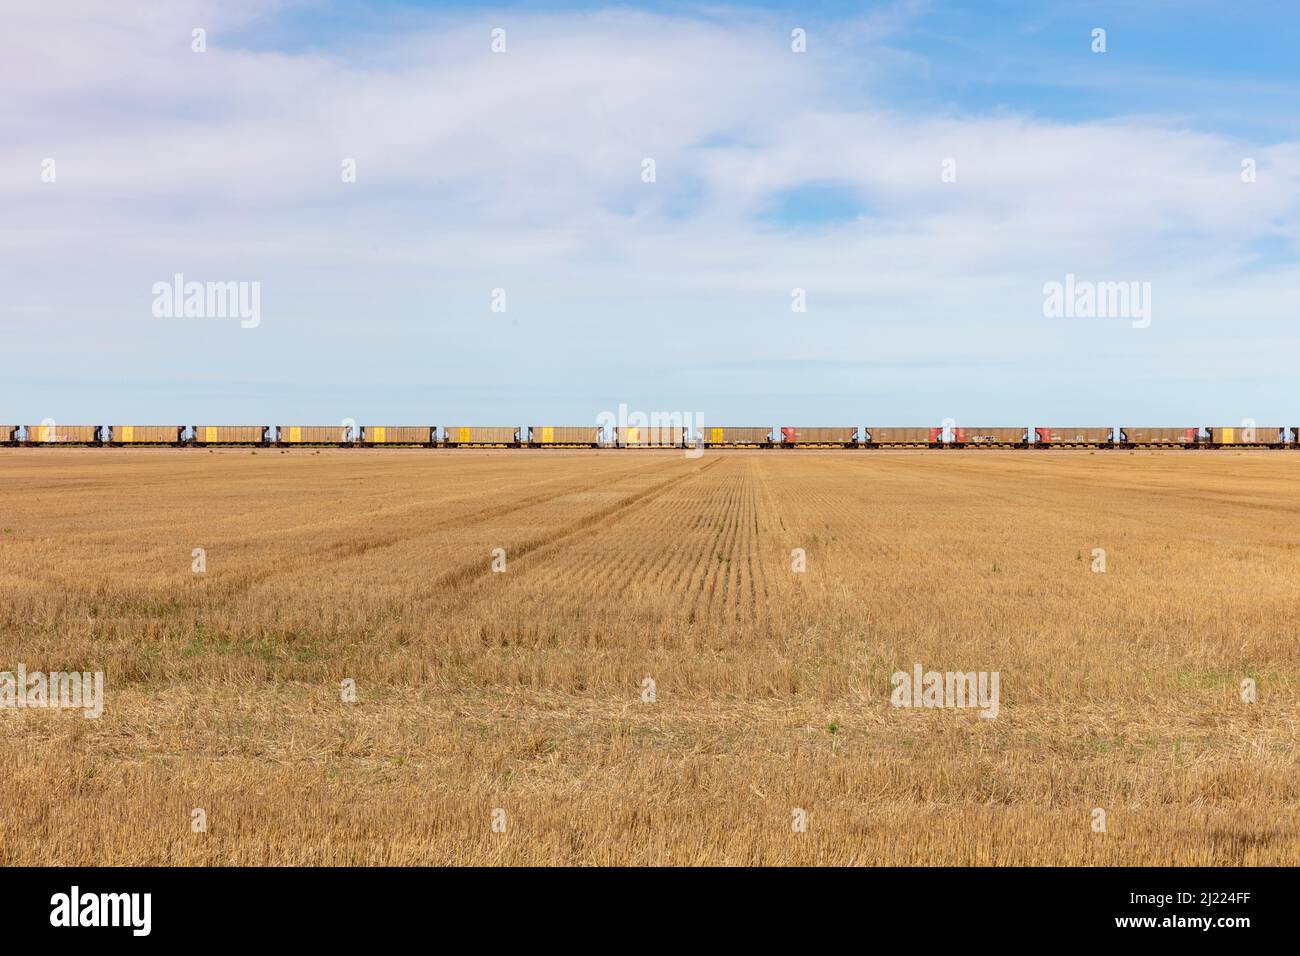 View across a stubble field and the long line of yellow boxcar wagons of a freight train on the horizon line. Stock Photo